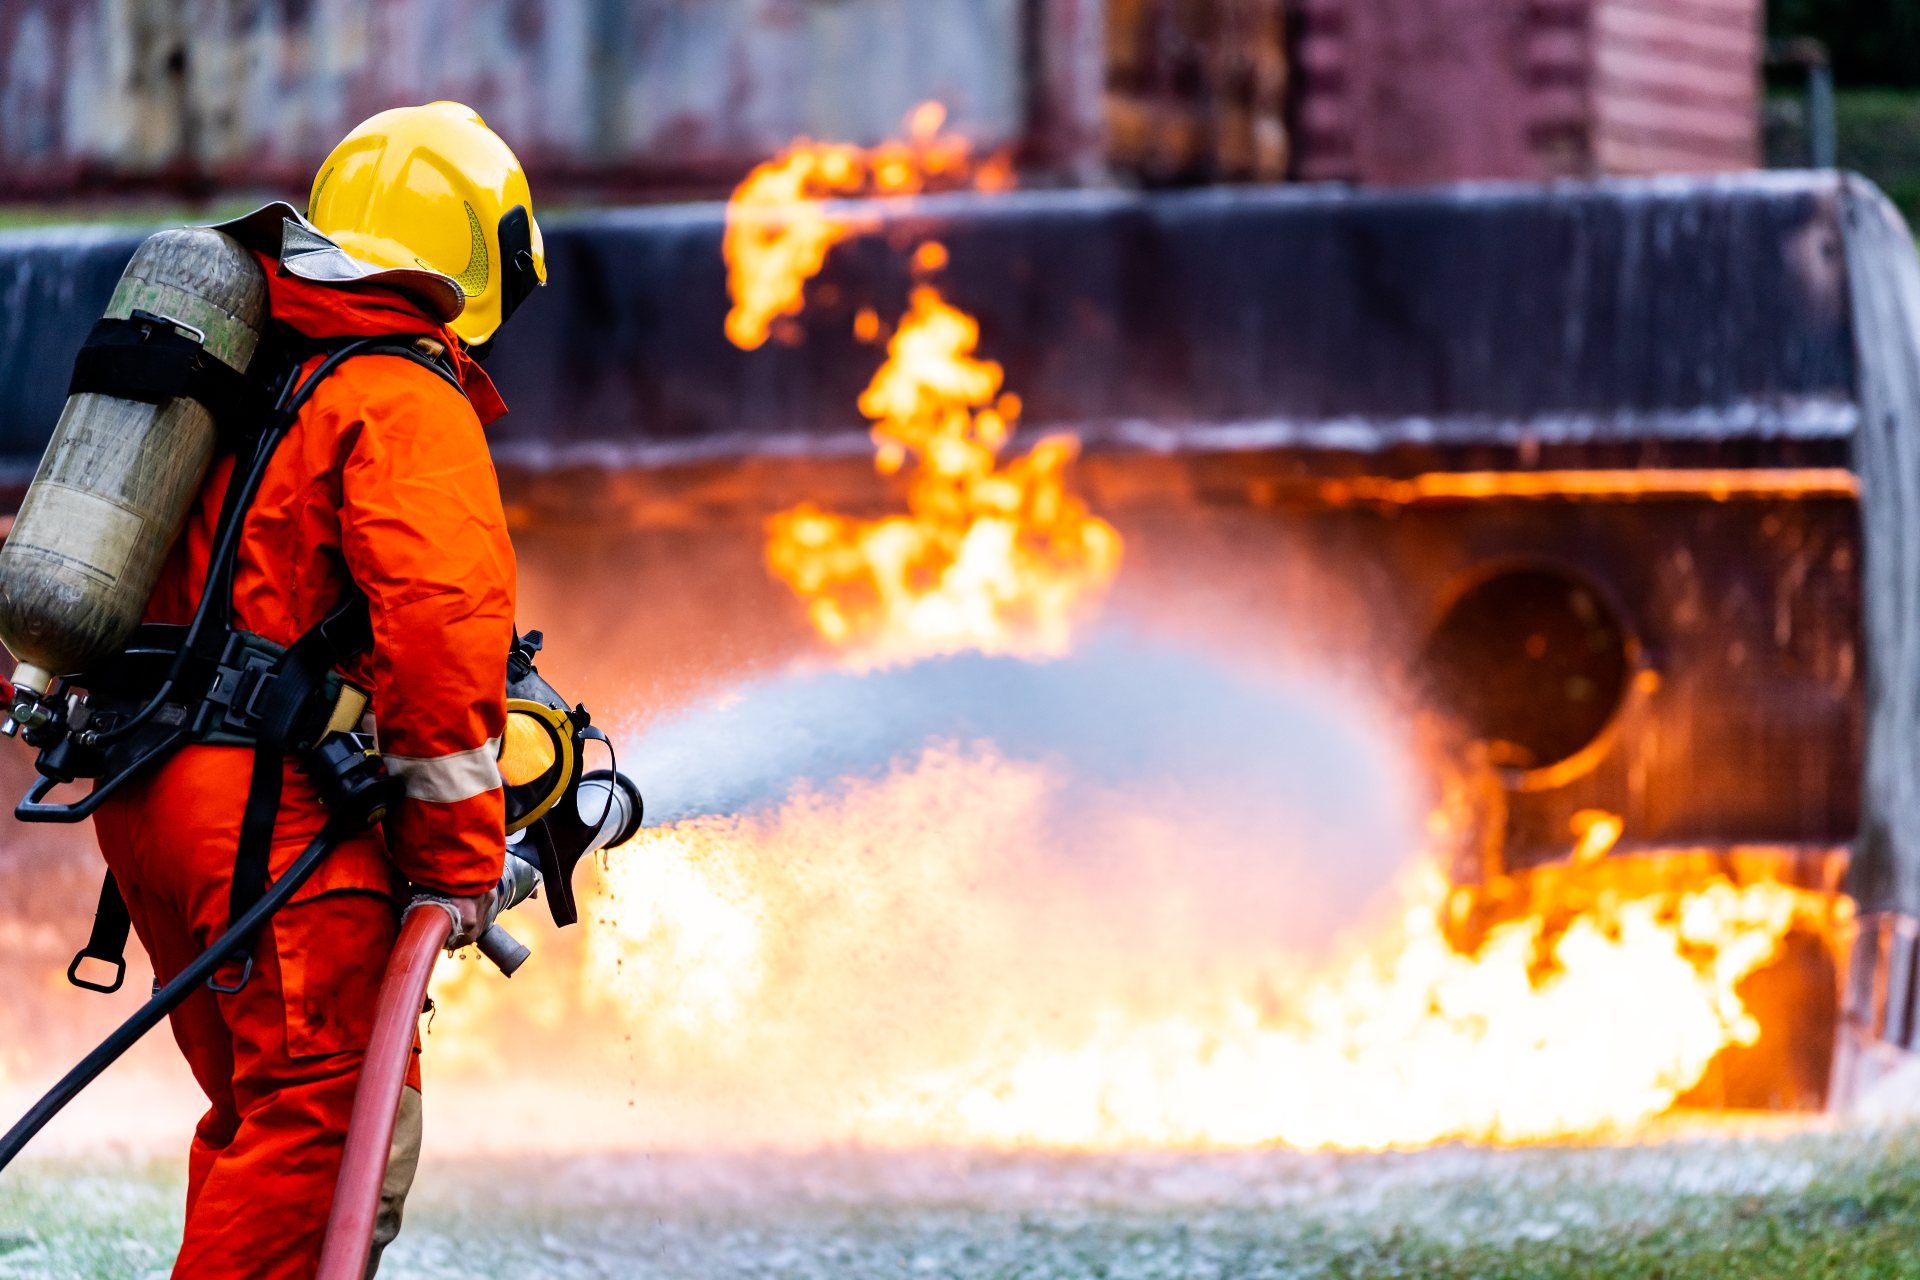 A firefighter uses firefighting foam to extinguish an oil tanker fire